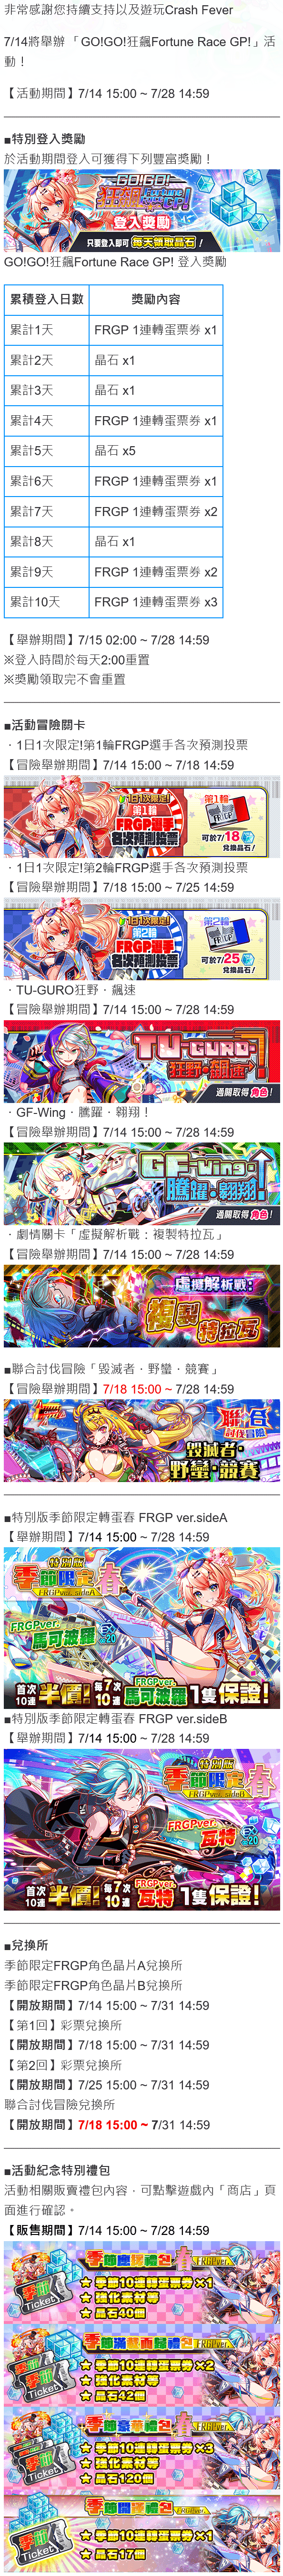 「GO!GO!狂飙Fortune Race GP!」.png